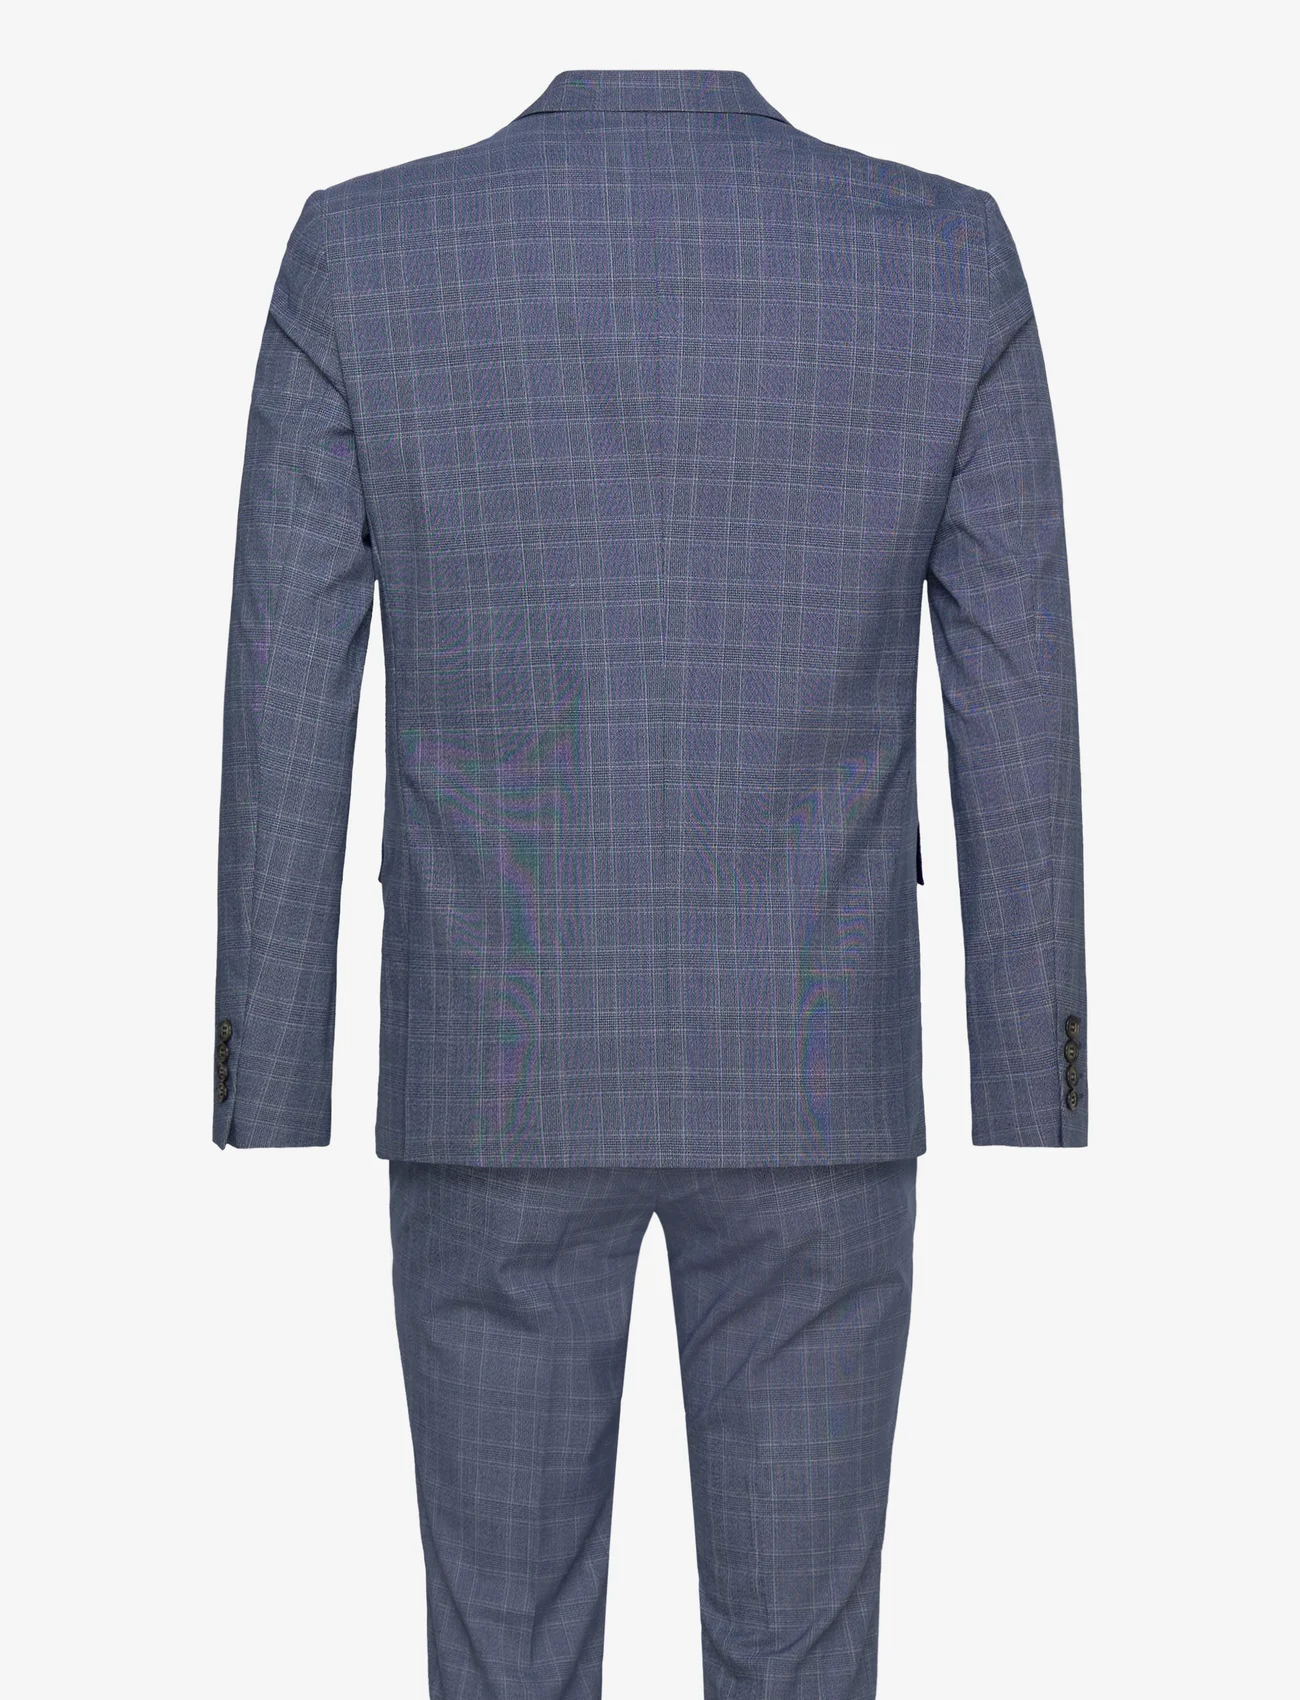 Lindbergh - Checked stretch suit - double breasted suits - blue - 1